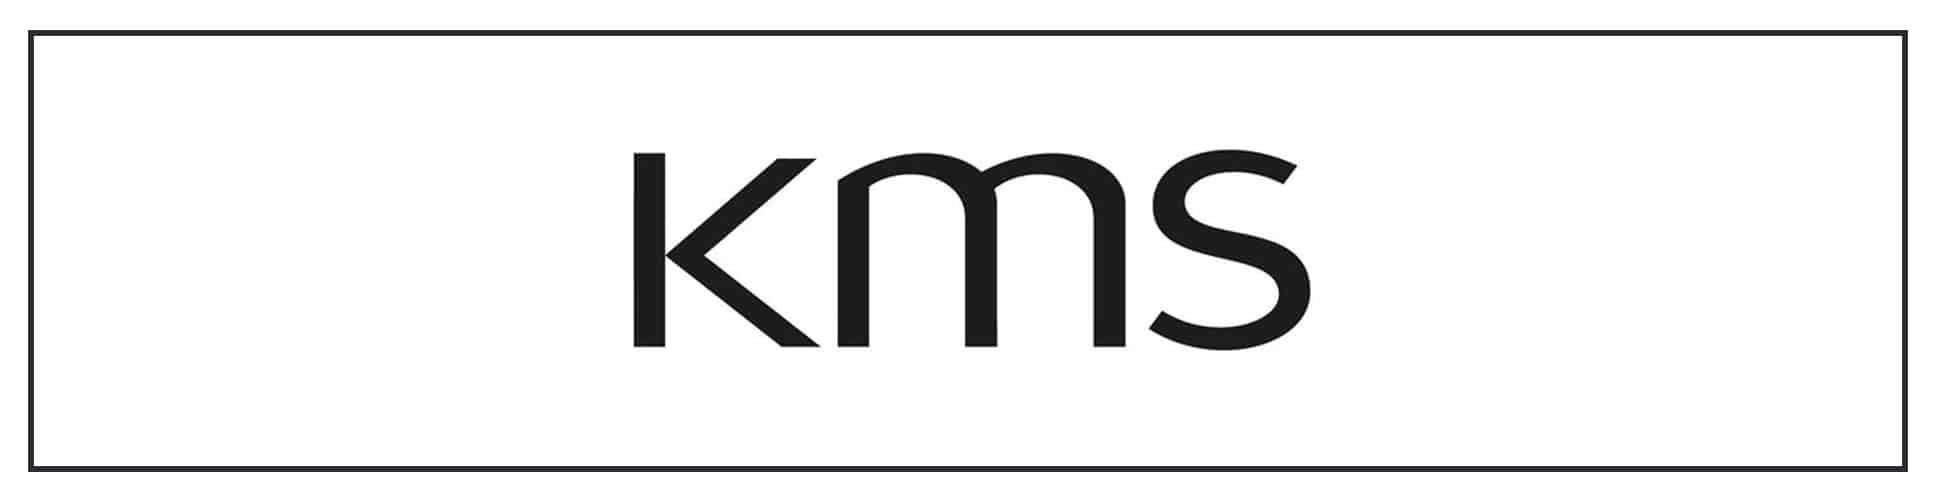 A black and white logo with the word kms.